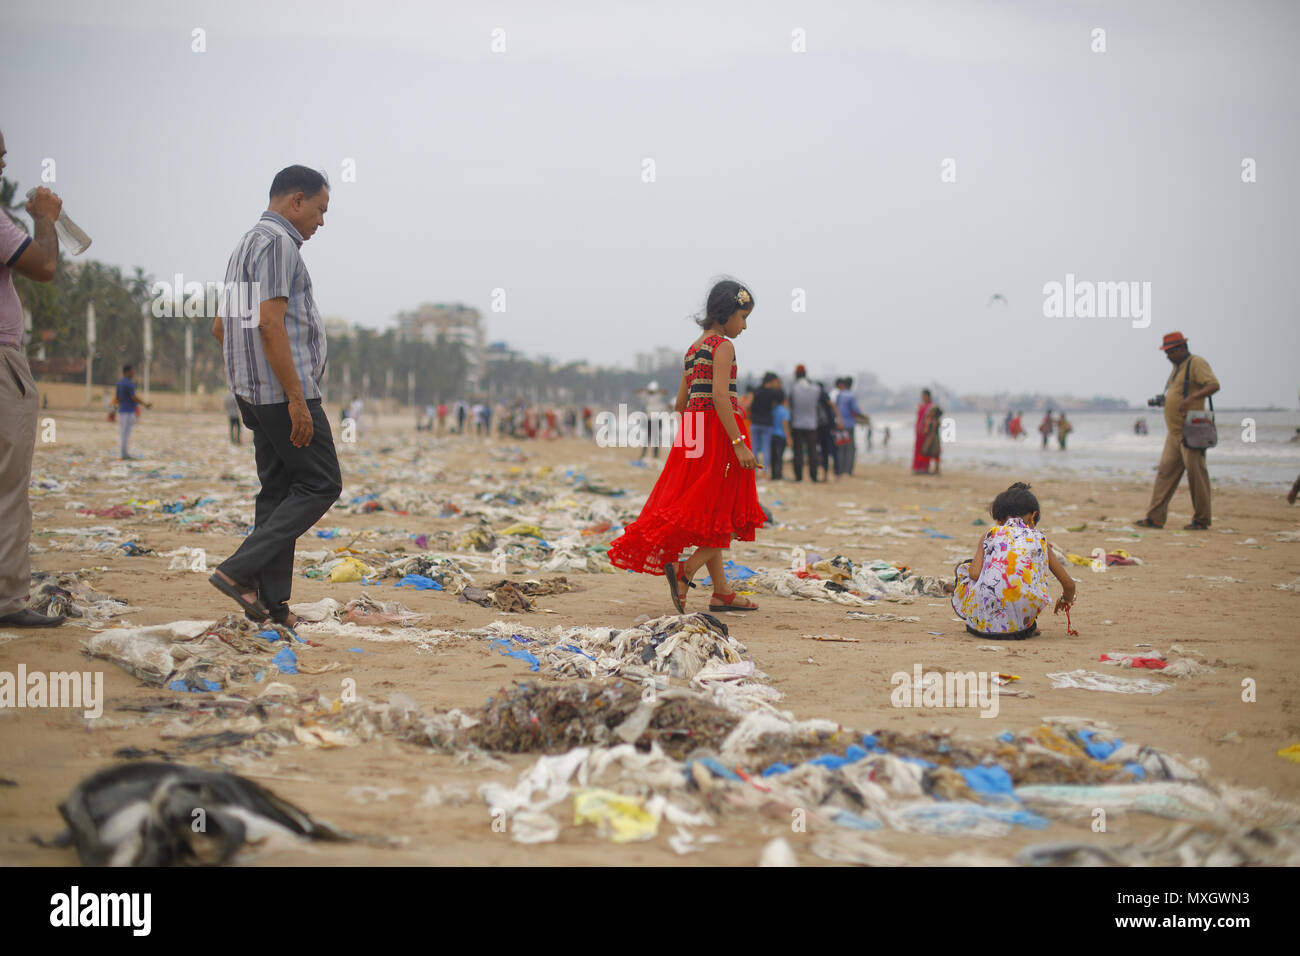 Mumbai, India. 3rd June, 2018. 03 June 2018, Juhu Beach - Mumbai : INDIA.Heaps of Plastic lie piled up at the Juhu Beach, a popular Beach Hangout place in Mumbai.everyday tonnes of Plastic waste gets washed ashore from the Arabian Sea.Our planet is drowning in plastic pollution.Today we produce about 300 million tonnes of plastic every year. That's nearly equivalent to the weight of the entire Human Population.Only 9% of all plastic waste ever produced has been recycled. About 12% has been incinerated, while the rest - 79% - has accumulated in landfills, dumps or the natural environmen Stock Photo